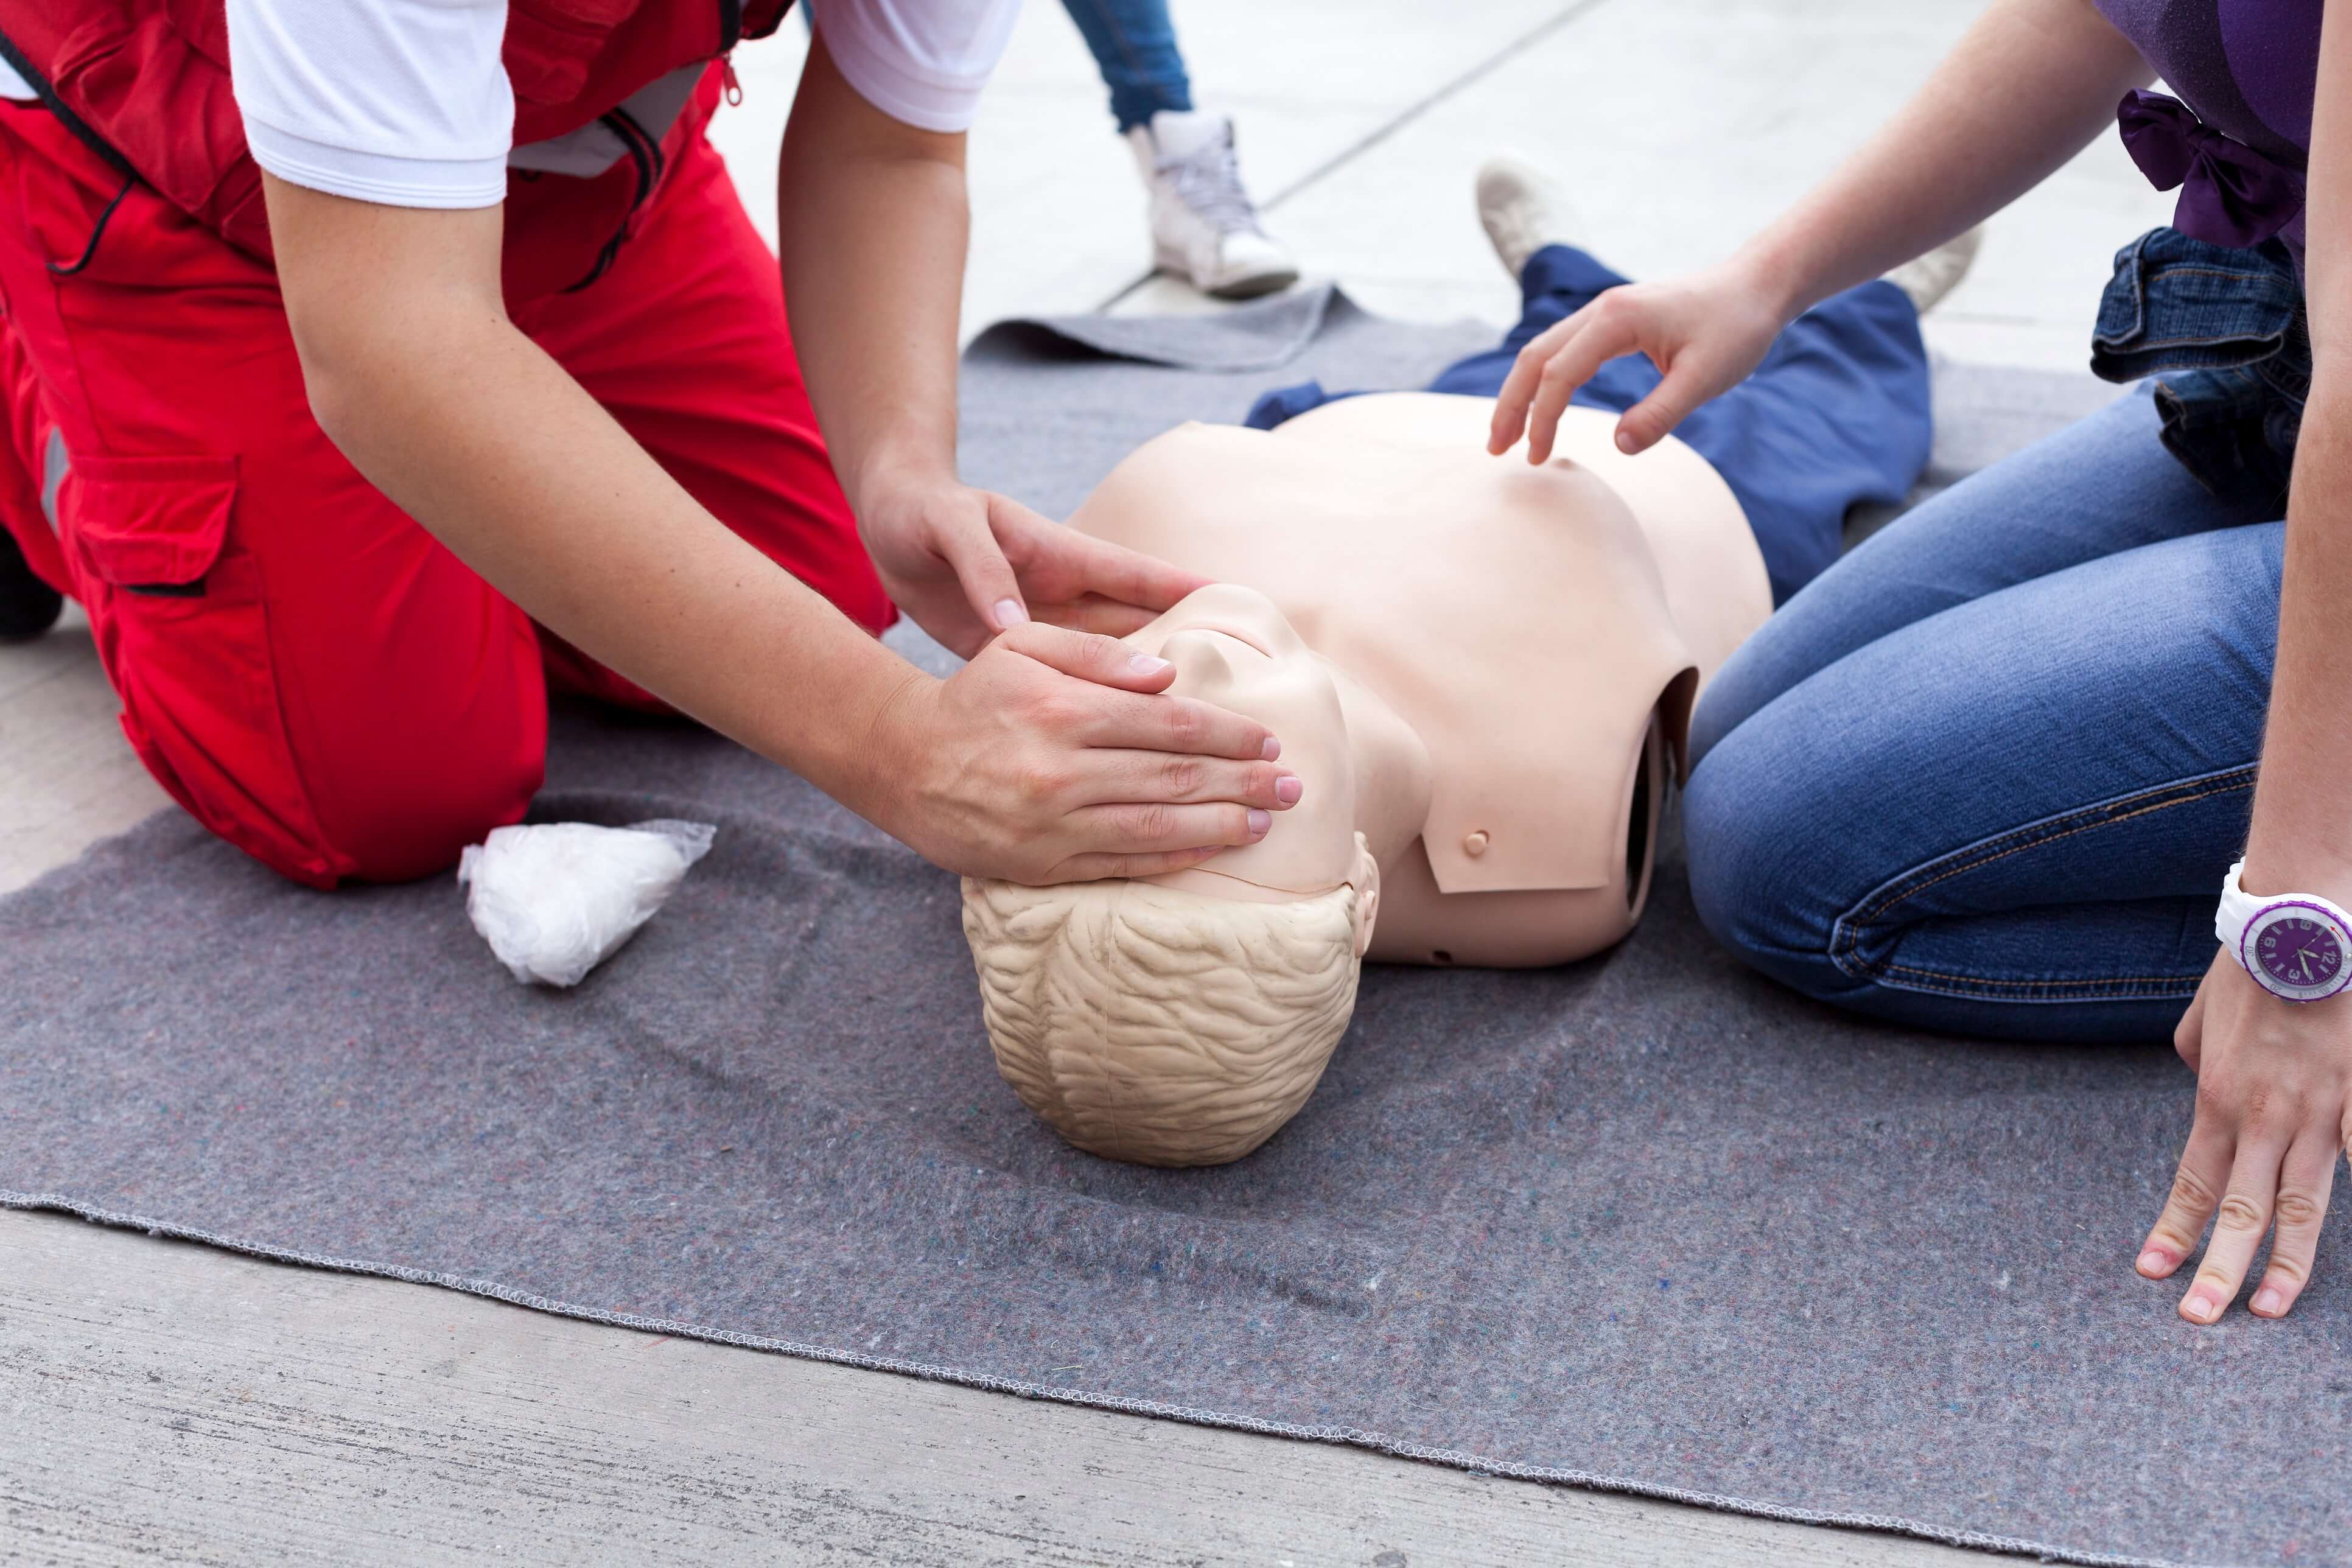 First aid training at work 